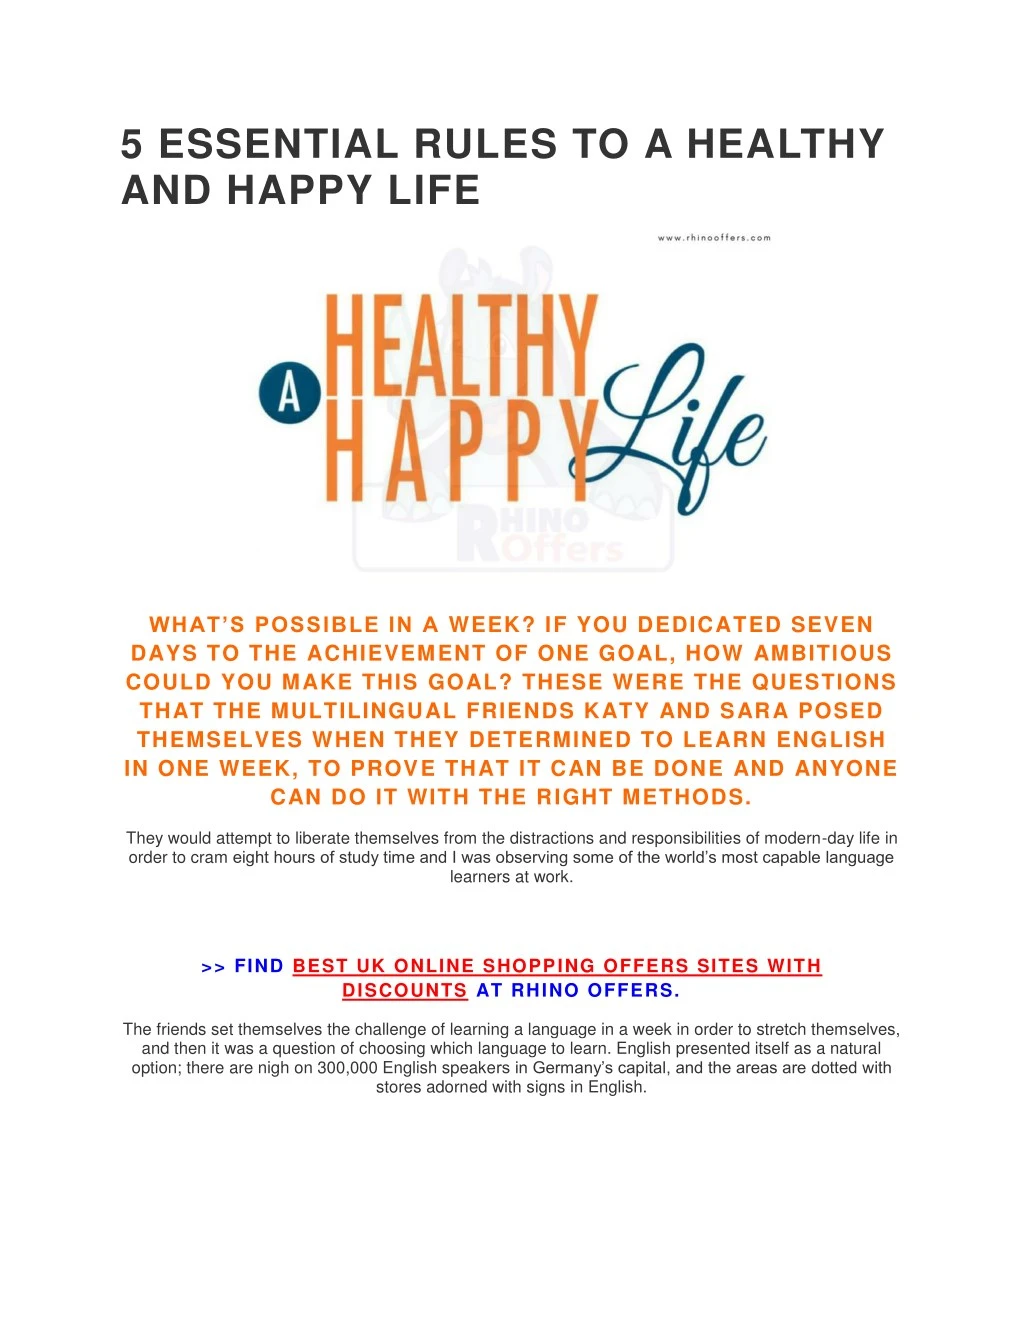 5 essential rules to a healthy and happy life